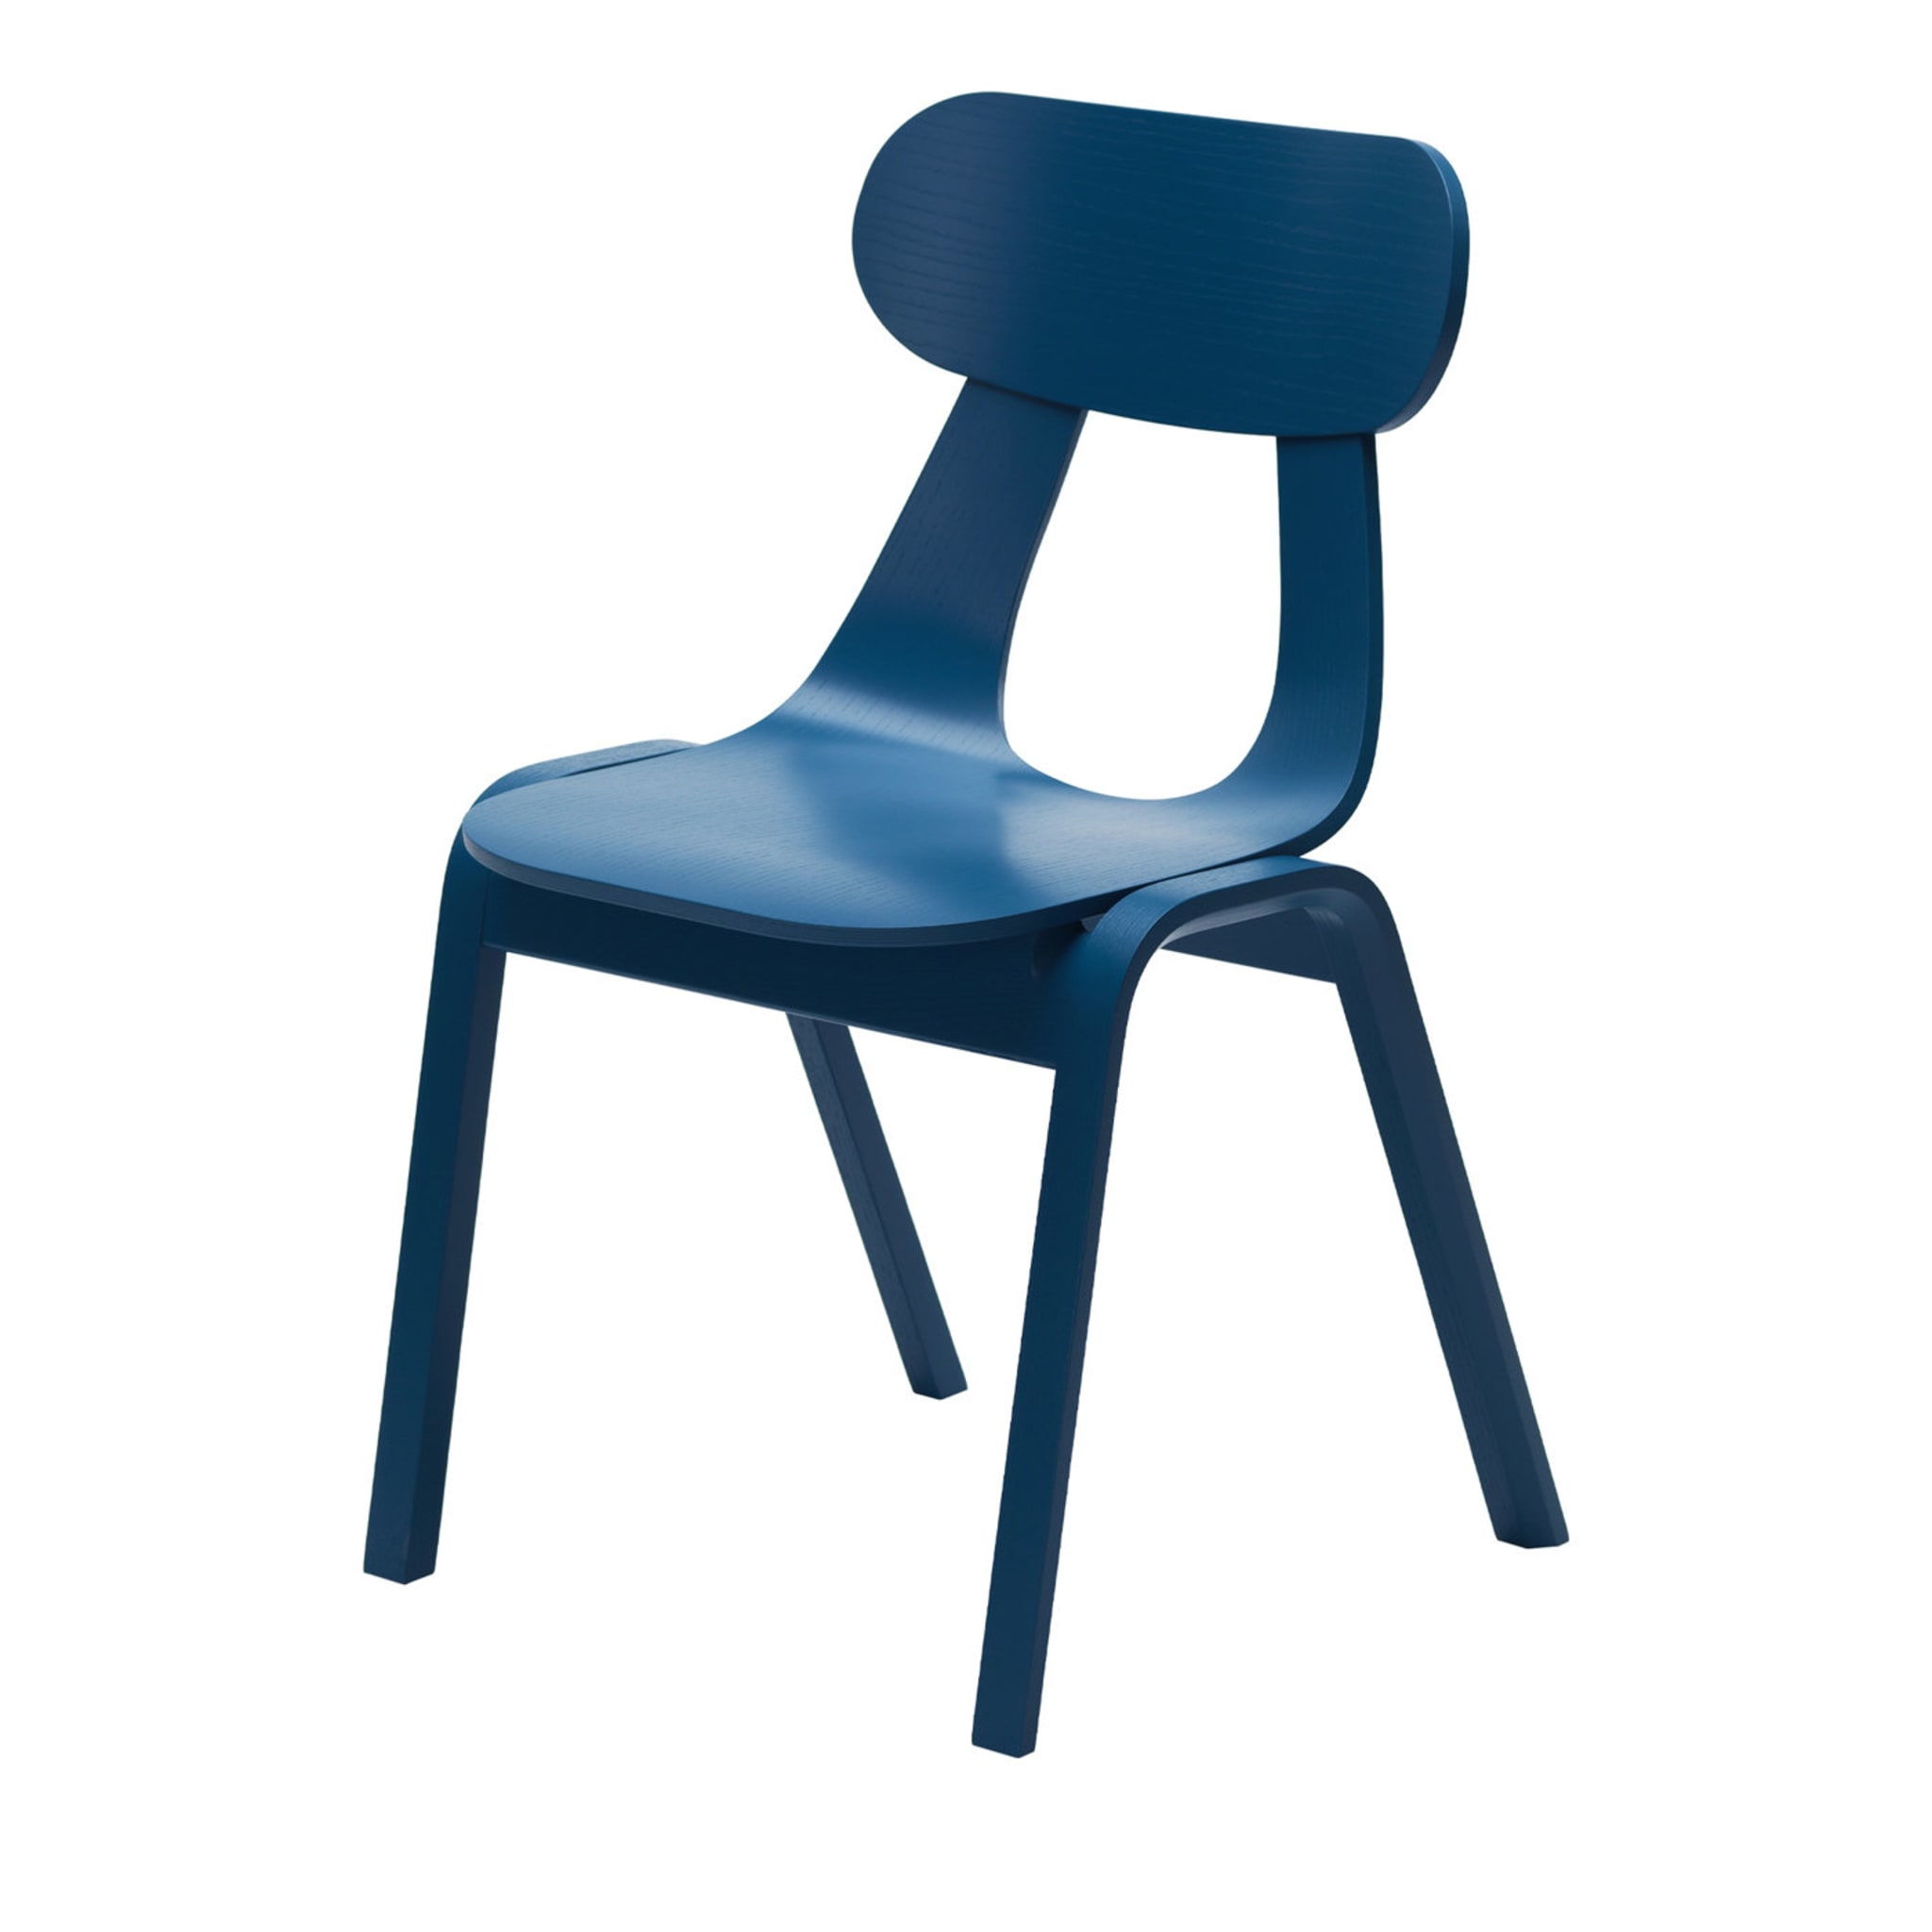 Set of 2 Blue Rapa Wood Chairs by Mentsen - Main view